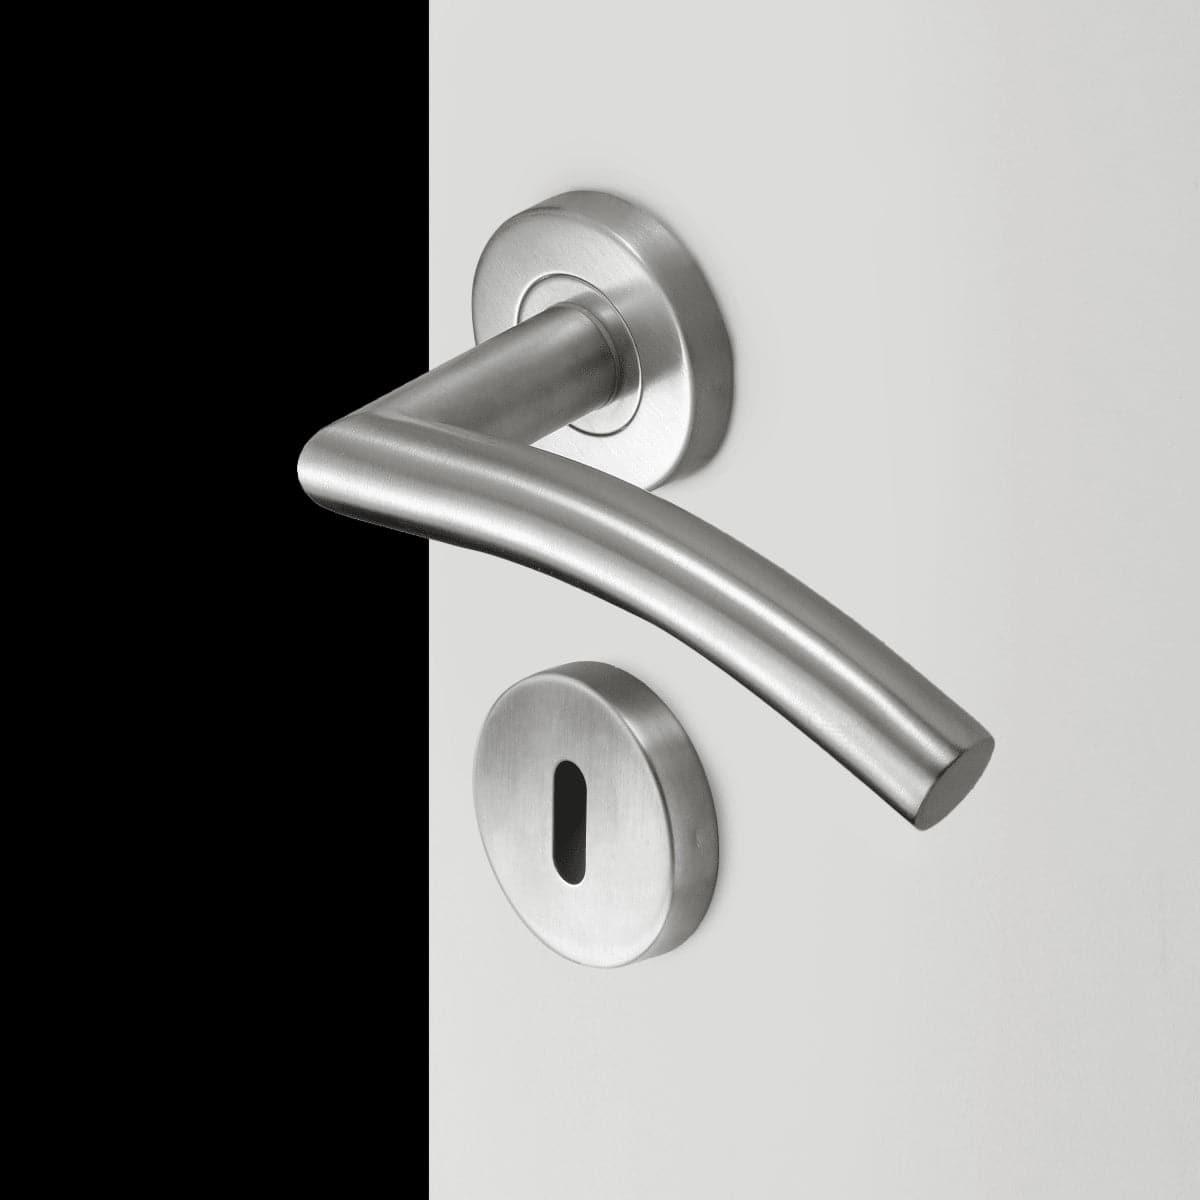 MARGAUD DOOR HANDLE WITH ROSETTE AND ESCUTCHEON IN STAINLESS STEEL WITH SATIN NICKEL FINISH - best price from Maltashopper.com BR410004442